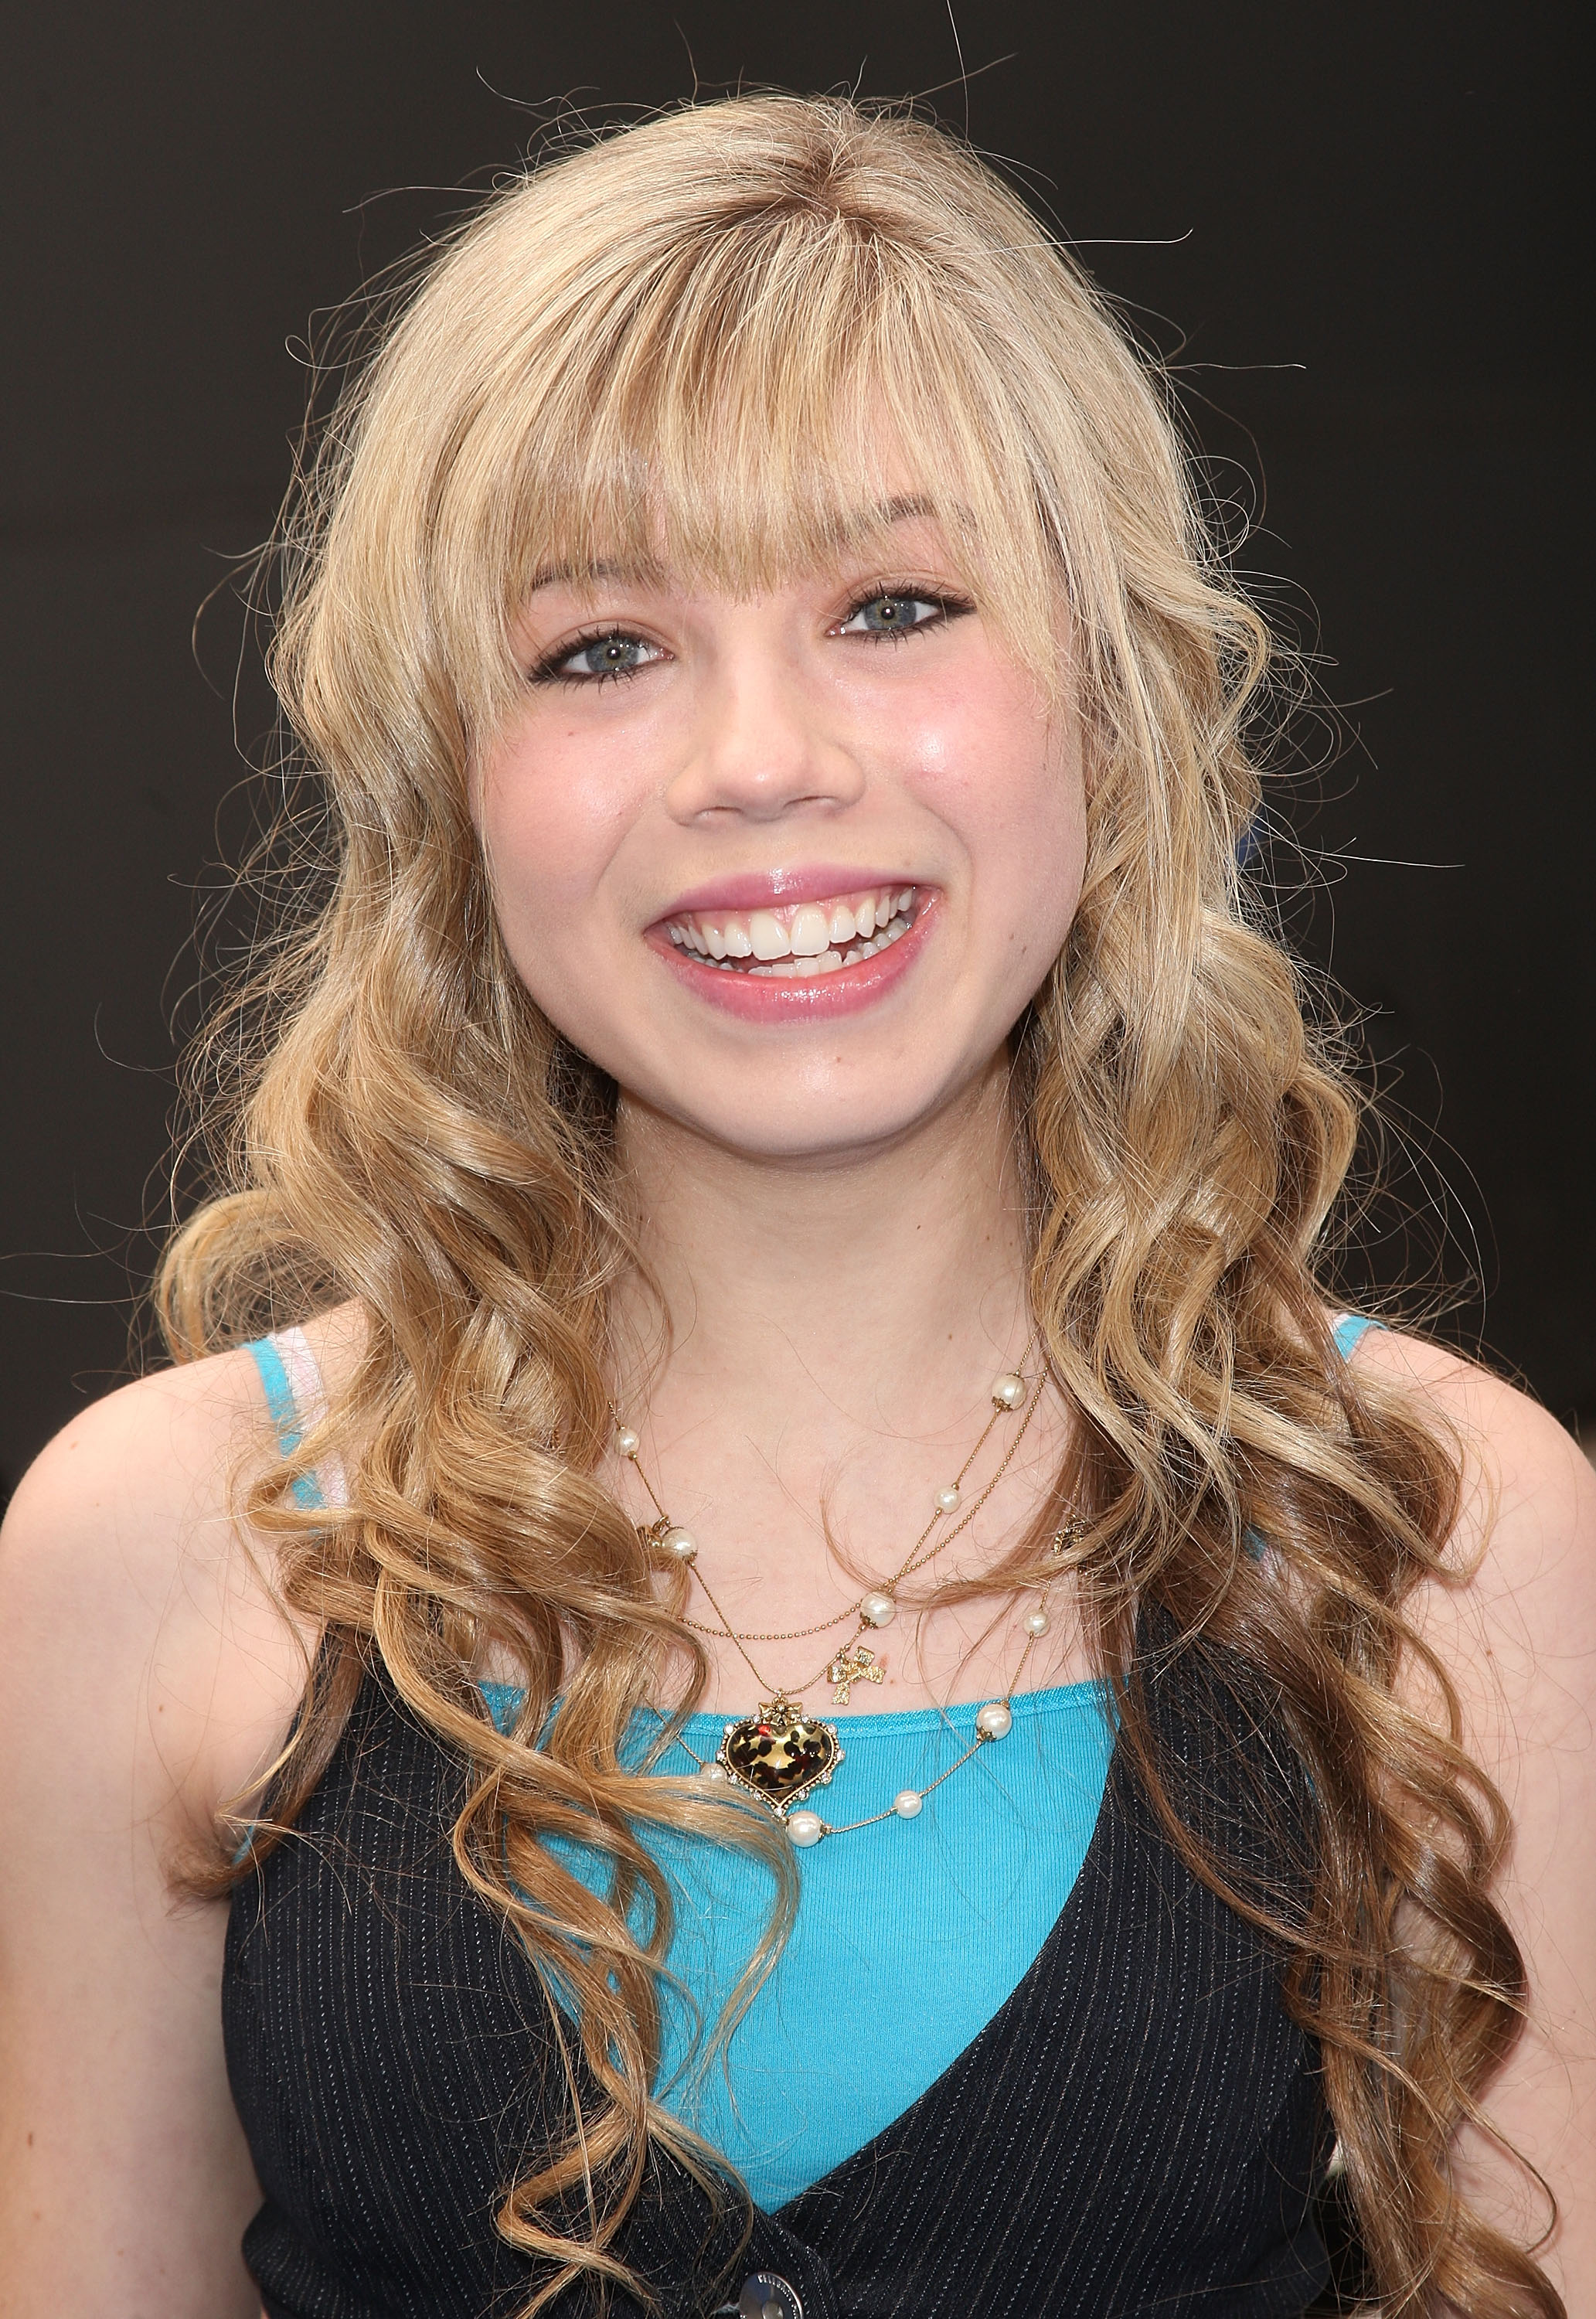 Jennette McCurdy attends the premiere of "Monsters Vs. Aliens" on March 22, 2009 in Universal City, California | Source: Getty Images